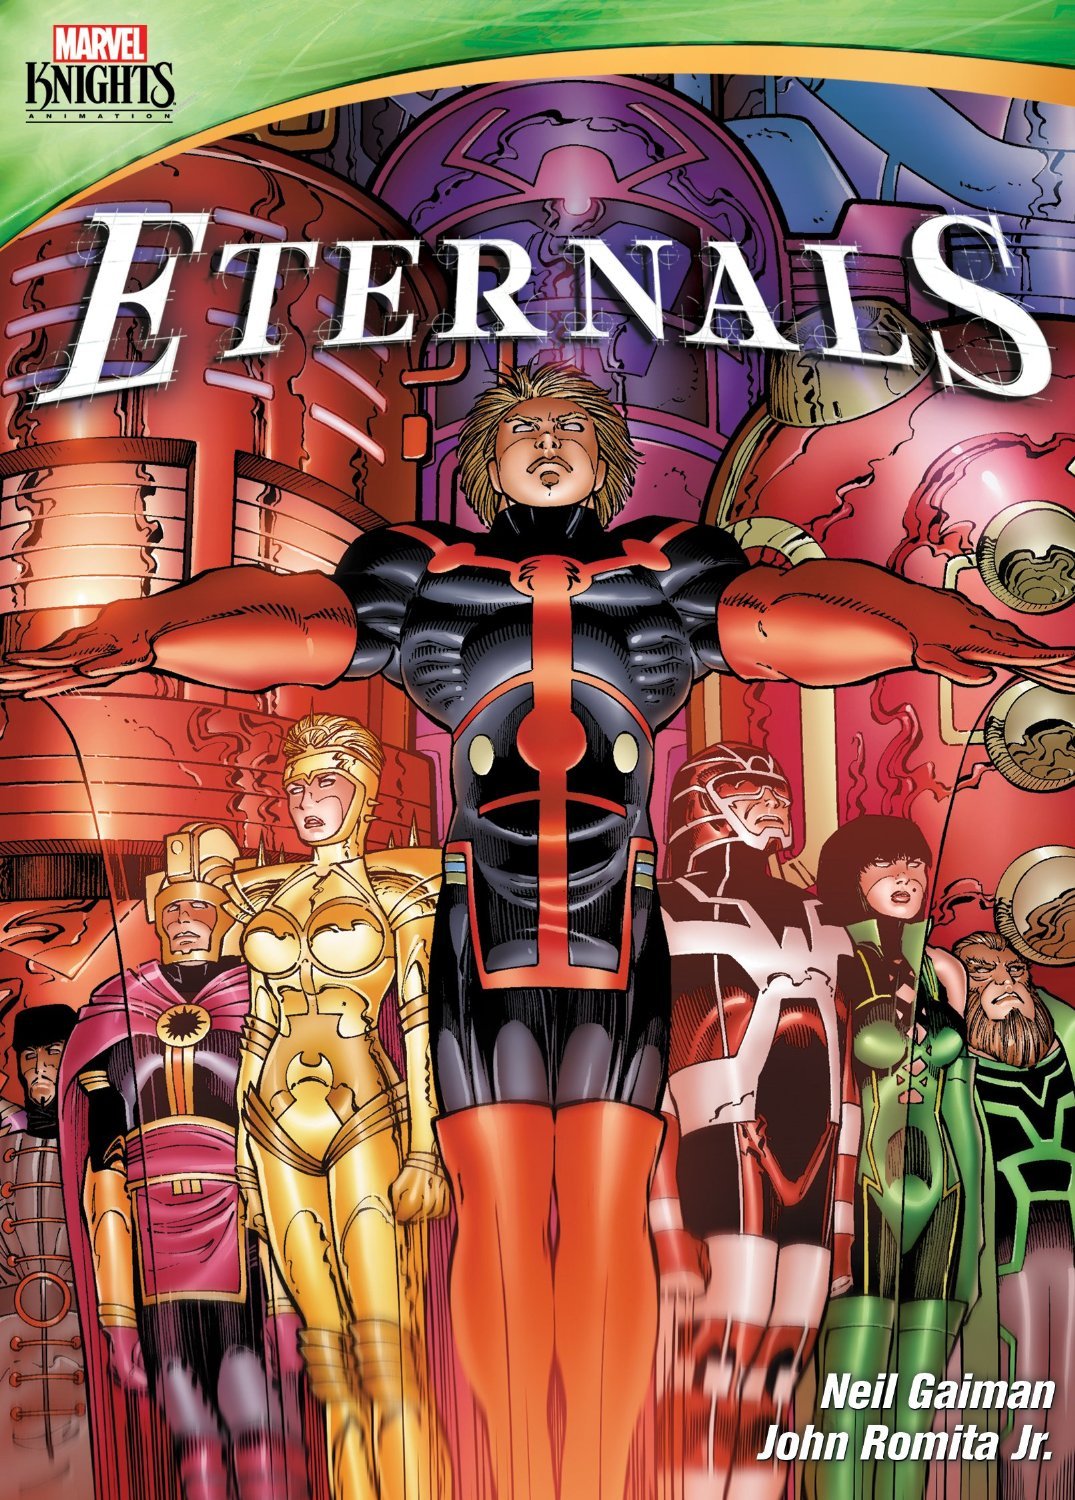 Marvel: The Eternals- will Angelina Jolie be a part of it?